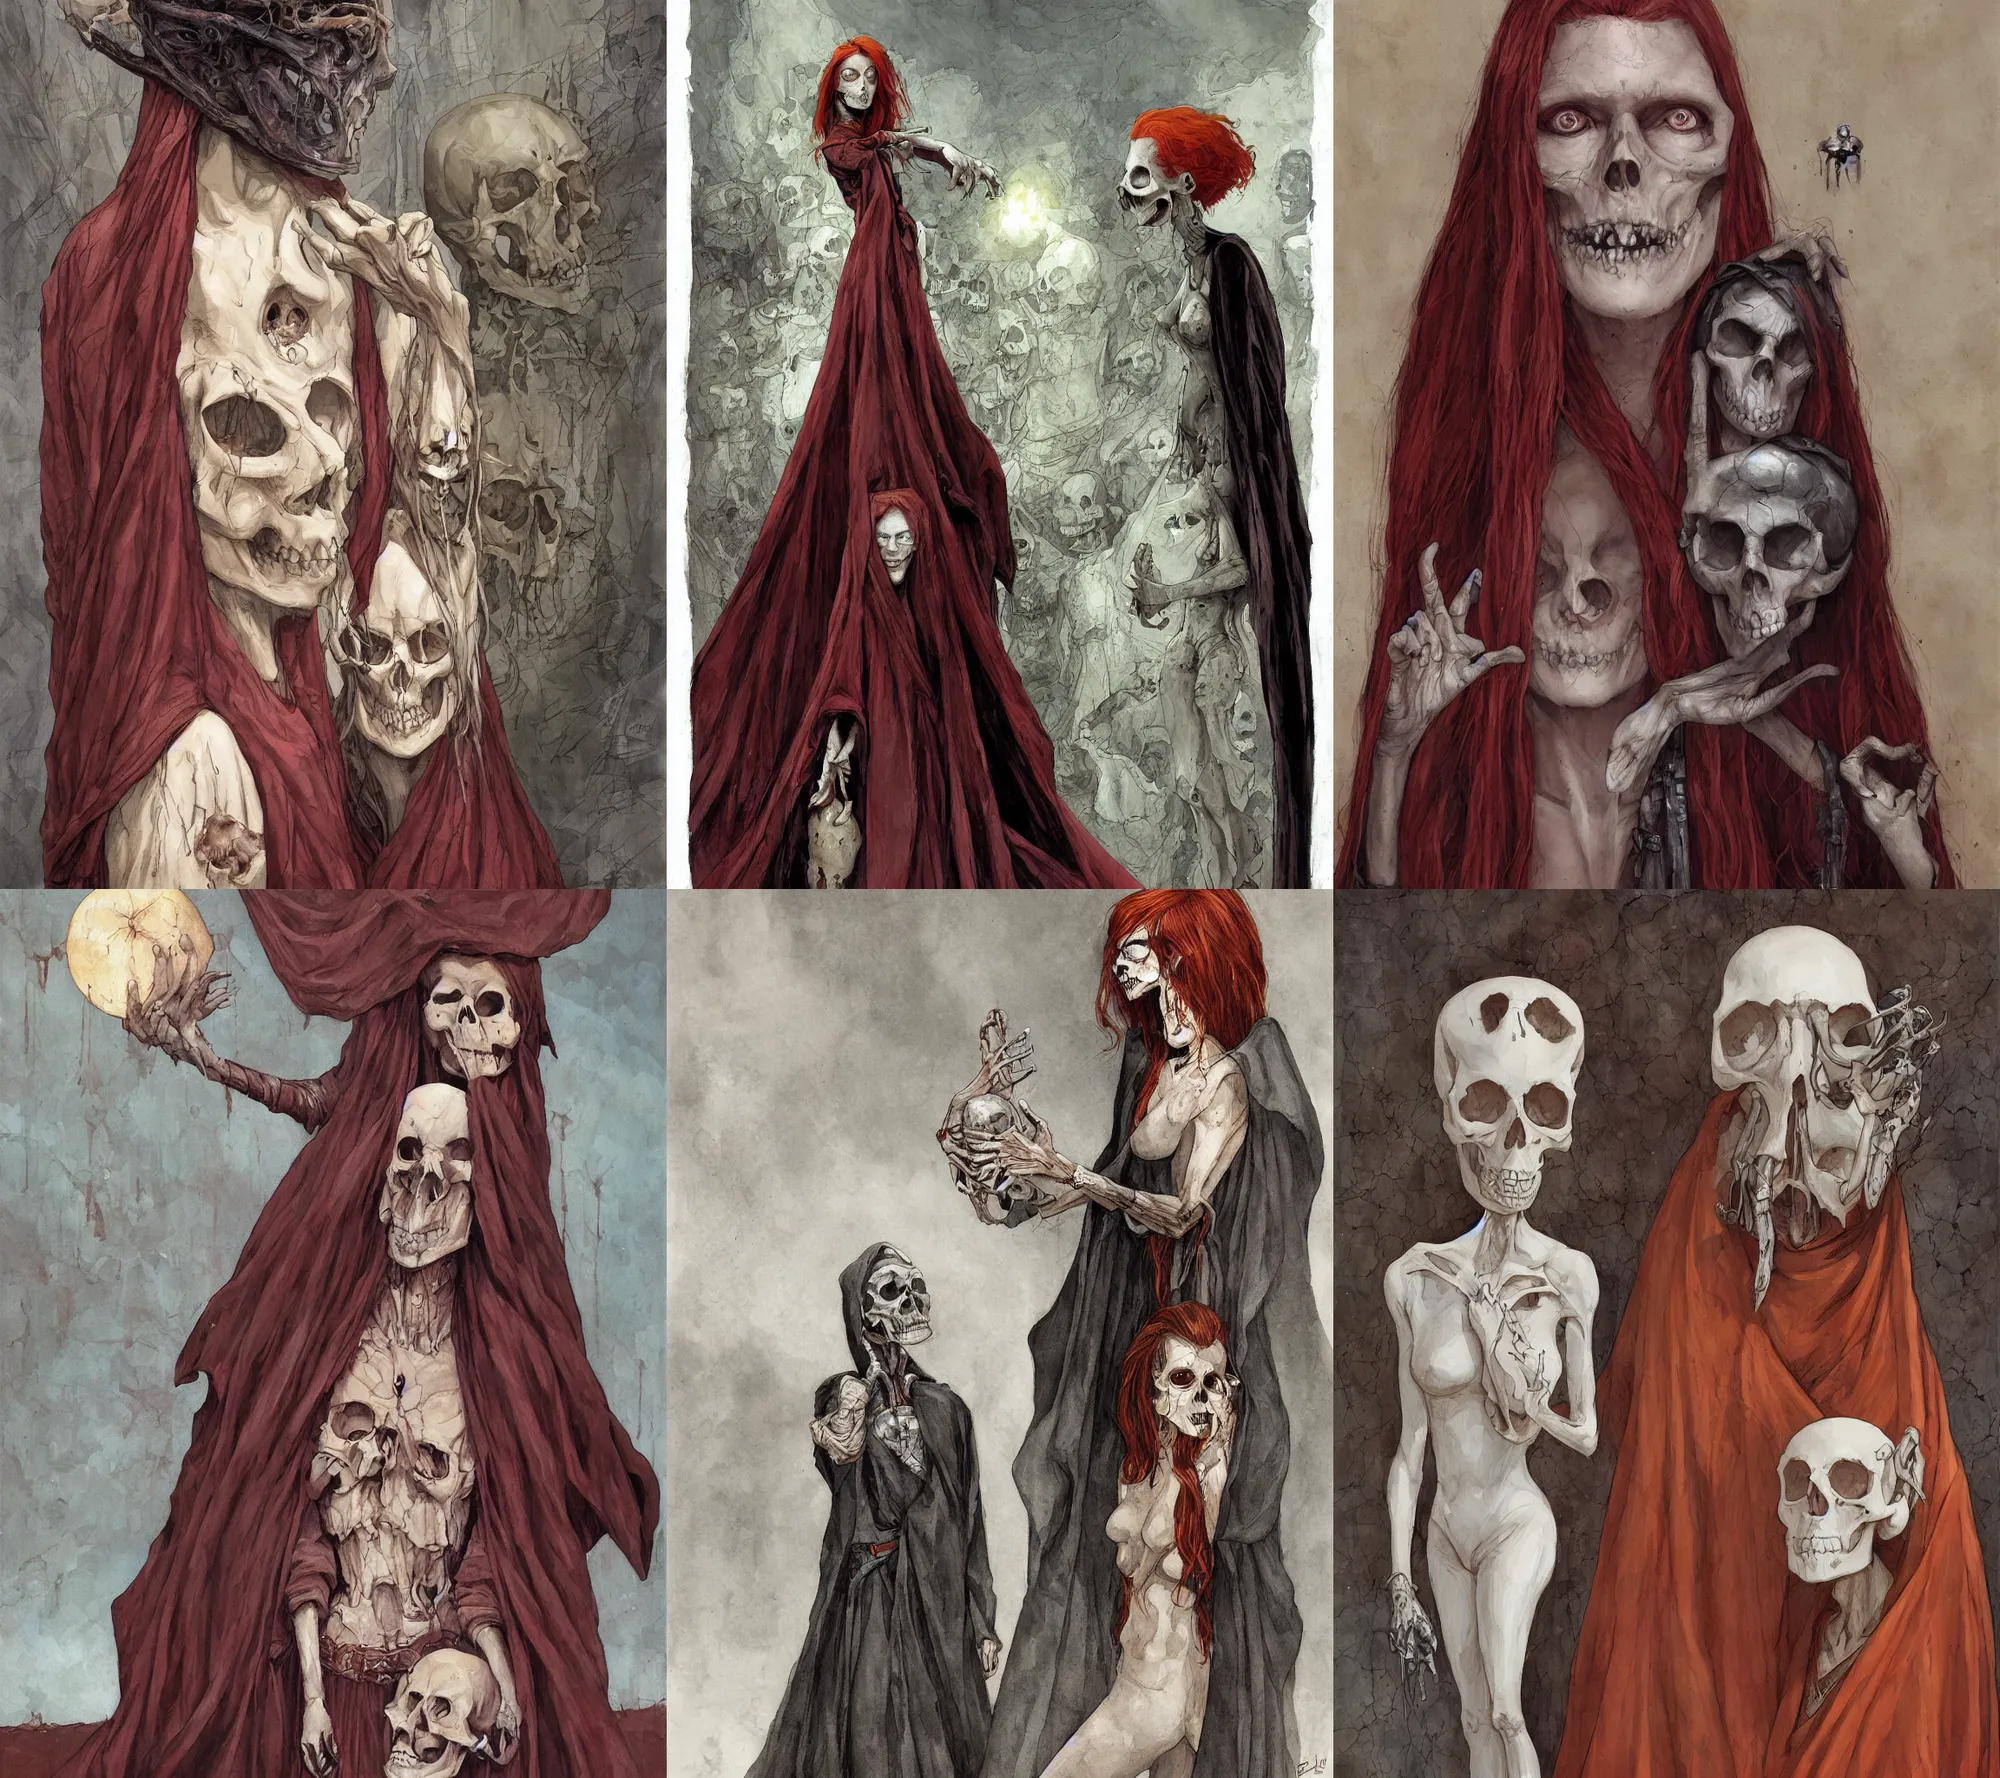 Prompt: A redheaded which stare at a skull in her hand. She wear a long dark robe with transparency. By Régis Loisel and Enki Bilal and Tony Sandoval and Oliver Ledroit. Oil painting